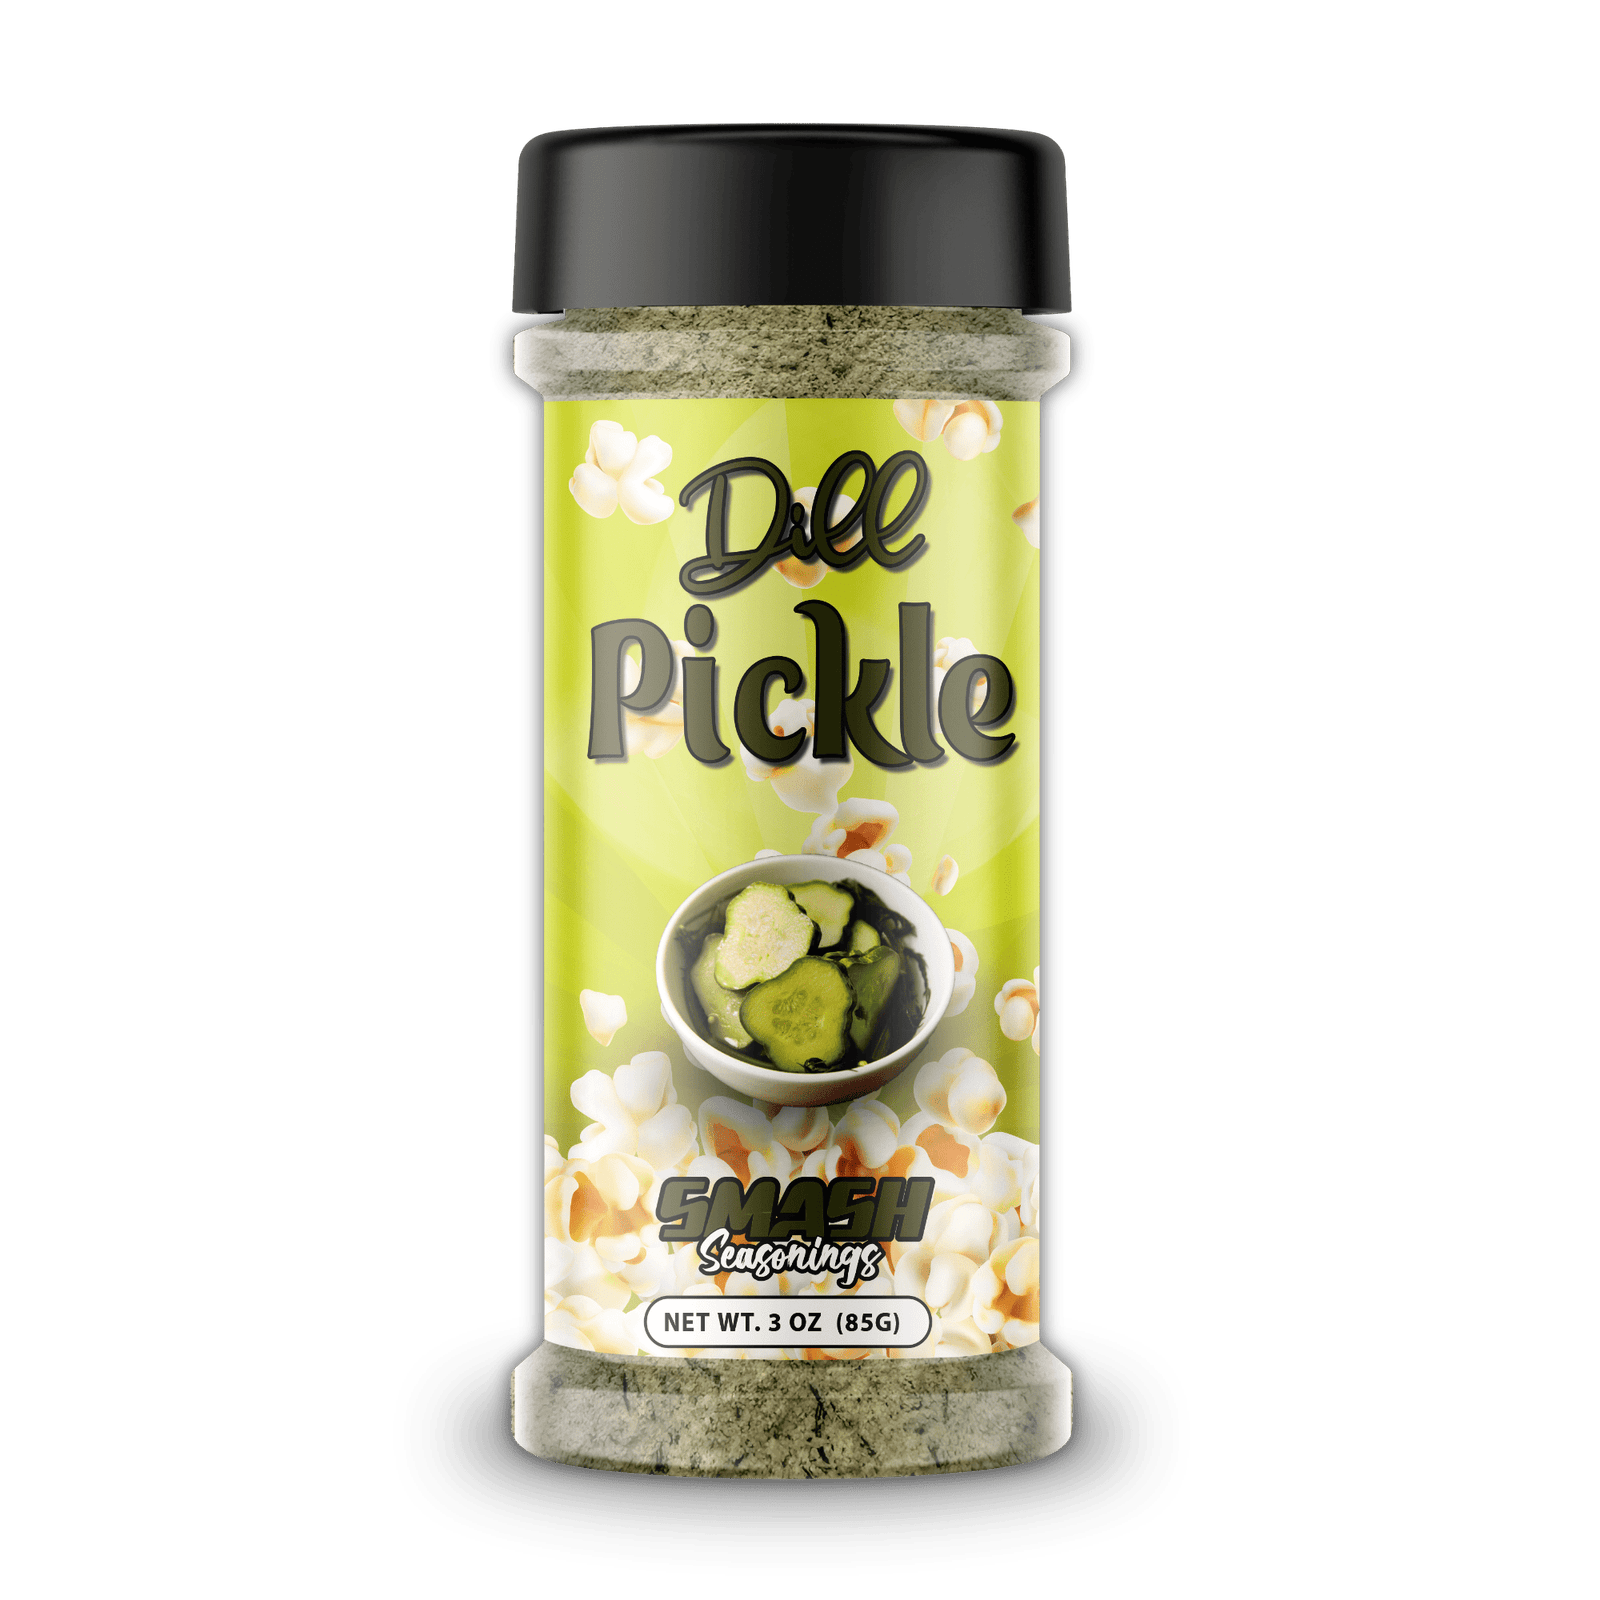 Seasoning in a Pickle - any suggestions as to what to do with it